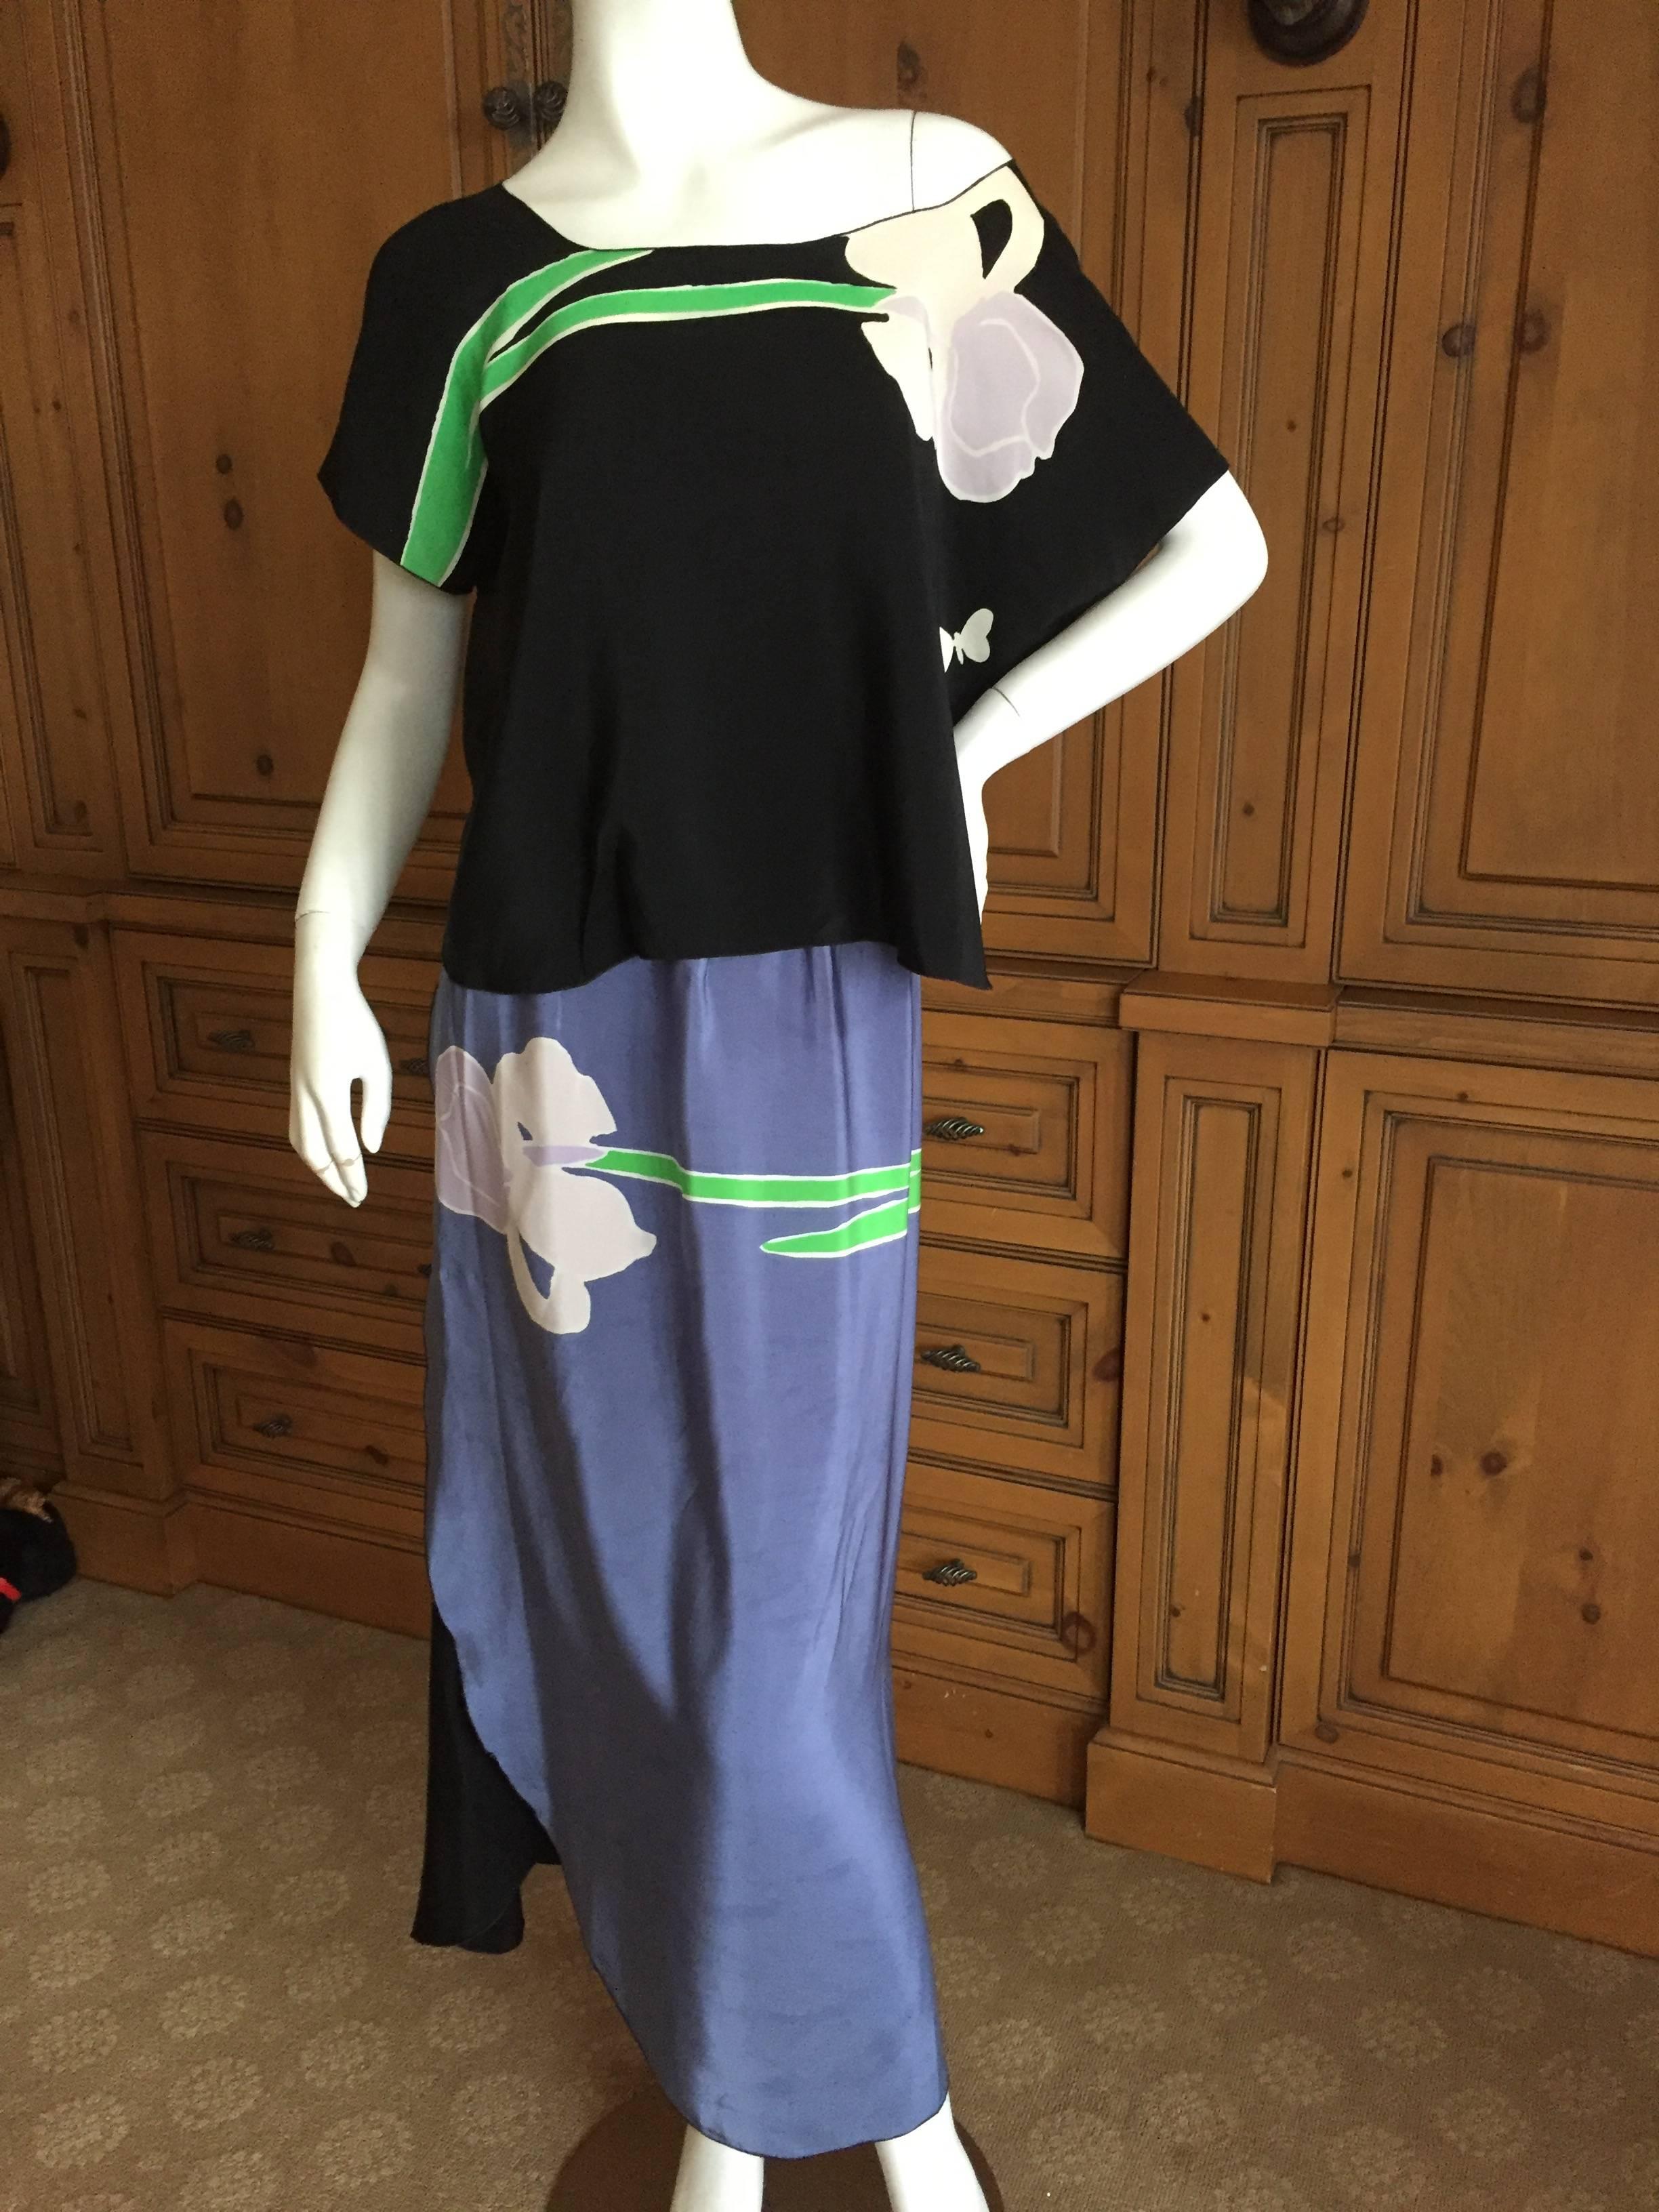 Michaele Vollbrach Silk Two Piece Iris & Butterfly Dress In Excellent Condition For Sale In Cloverdale, CA